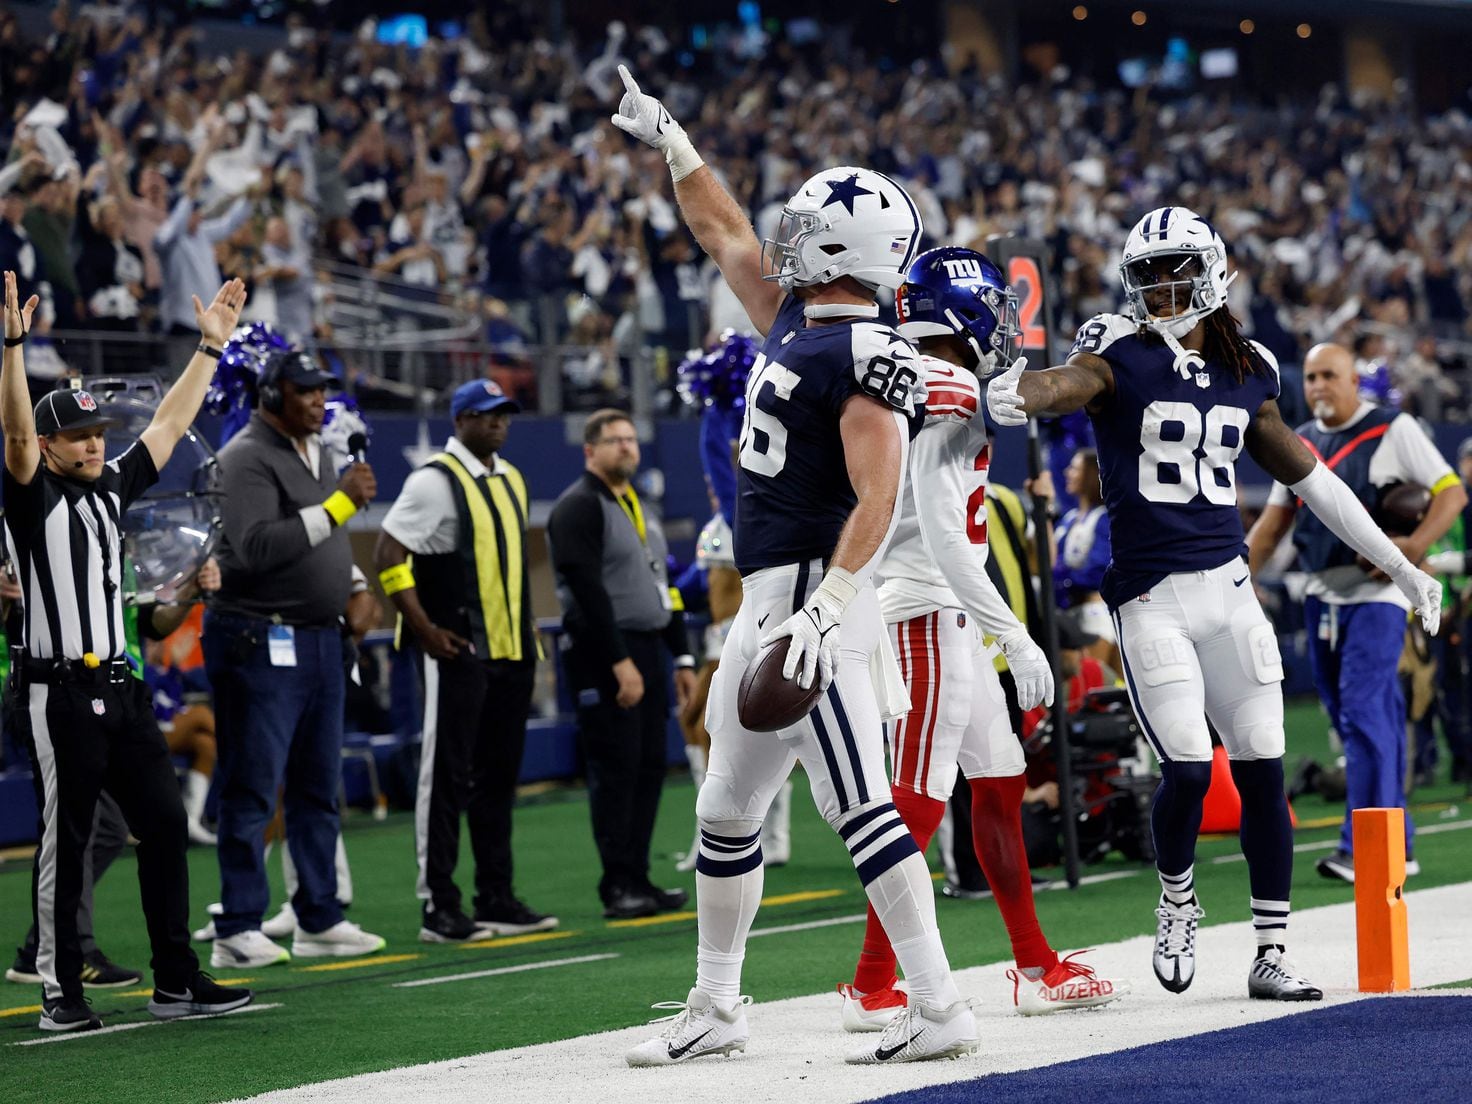 New York Giants 13-28 Dallas Cowboys, The Cowboys hold firm against a  decent Giants effort, summary: score, stats, highlights